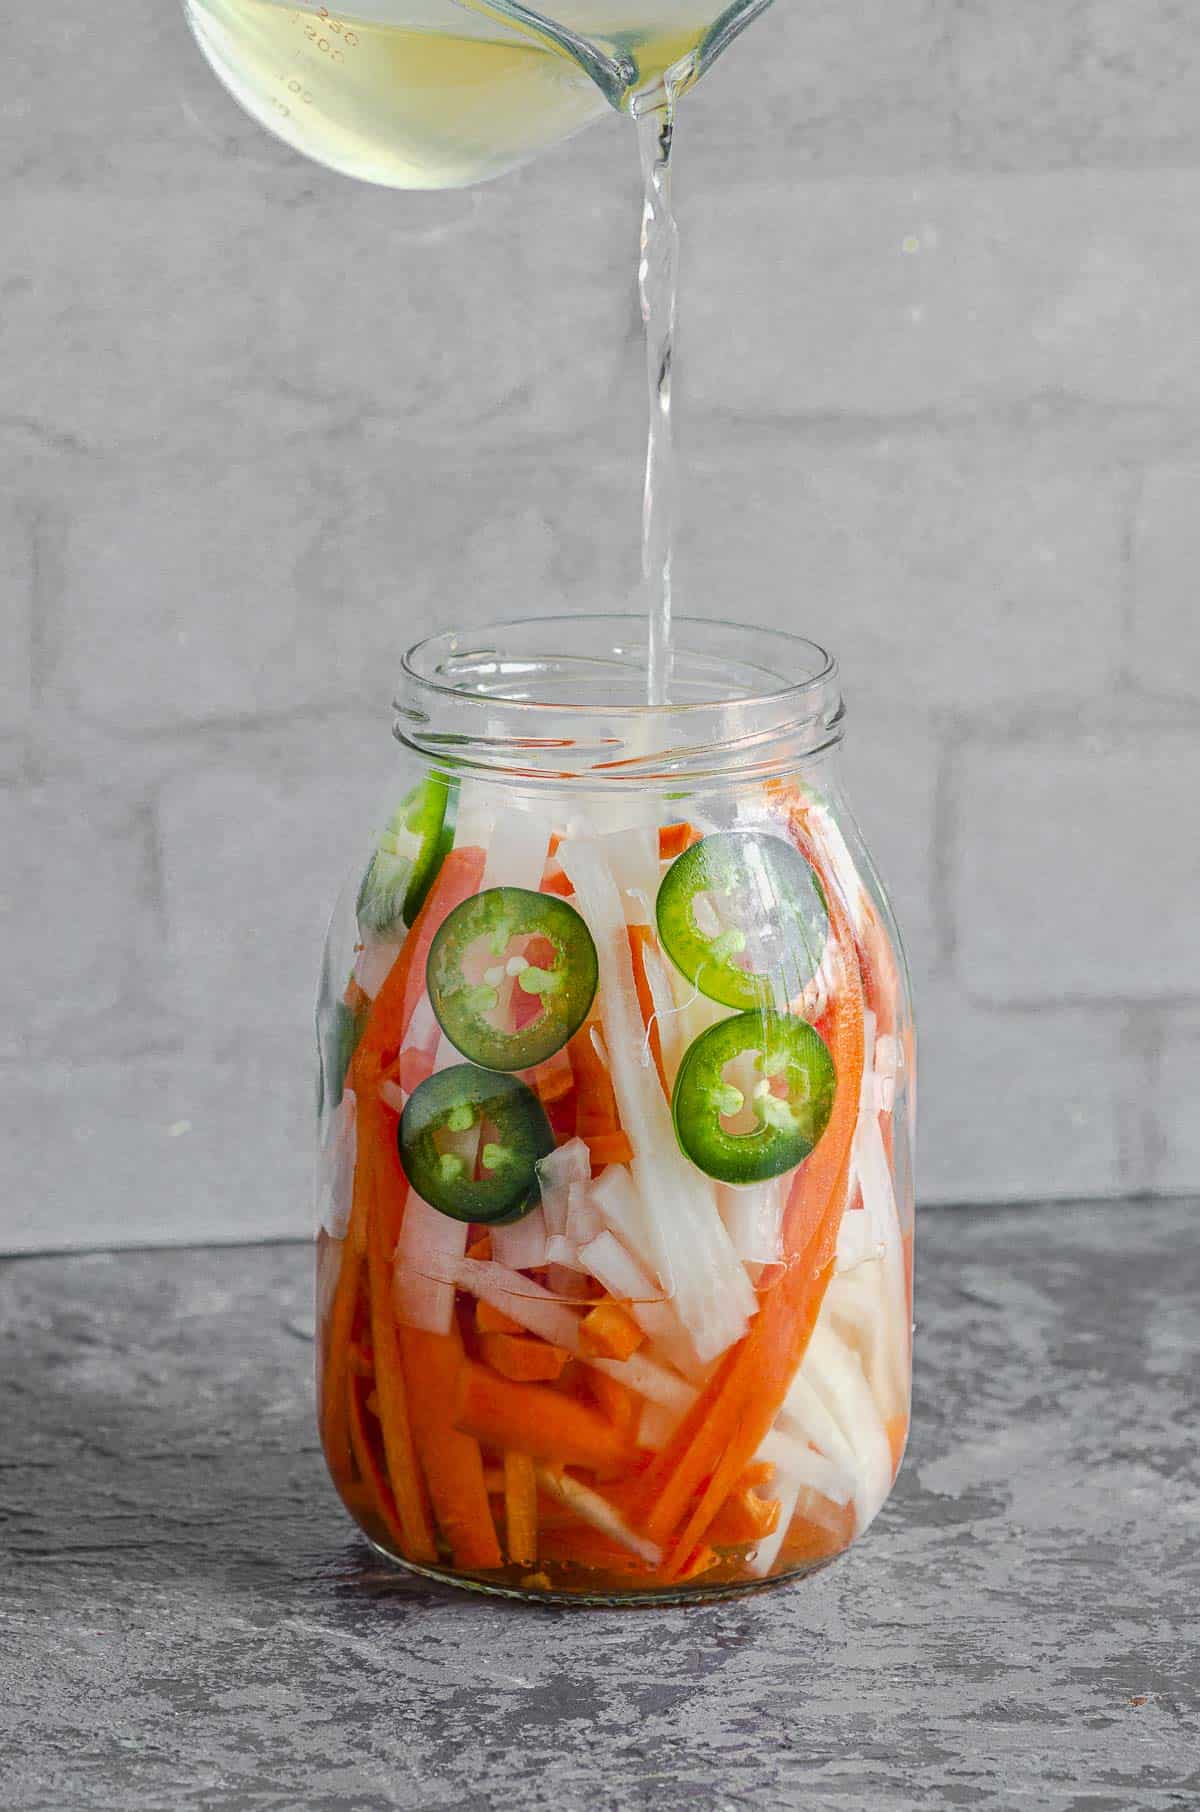 A jar of jalapeno, daikon and carrots with vinegar being poured on top